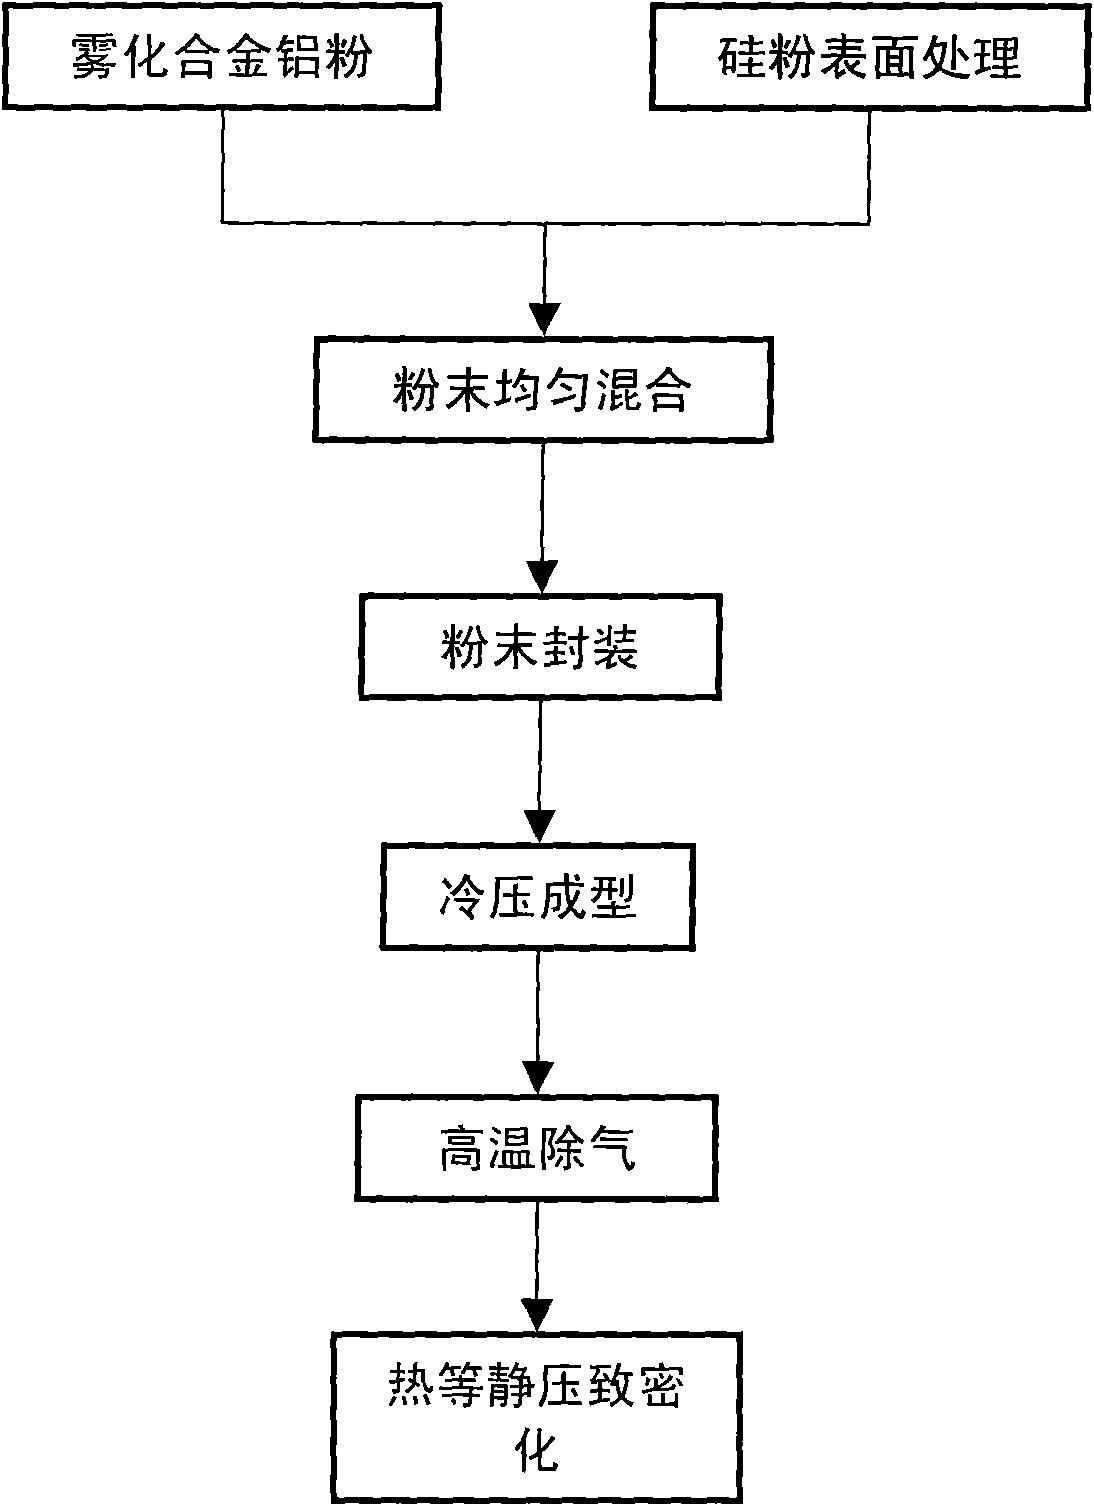 Preparation process of high volume fraction silicon particle enhanced aluminum based composite material